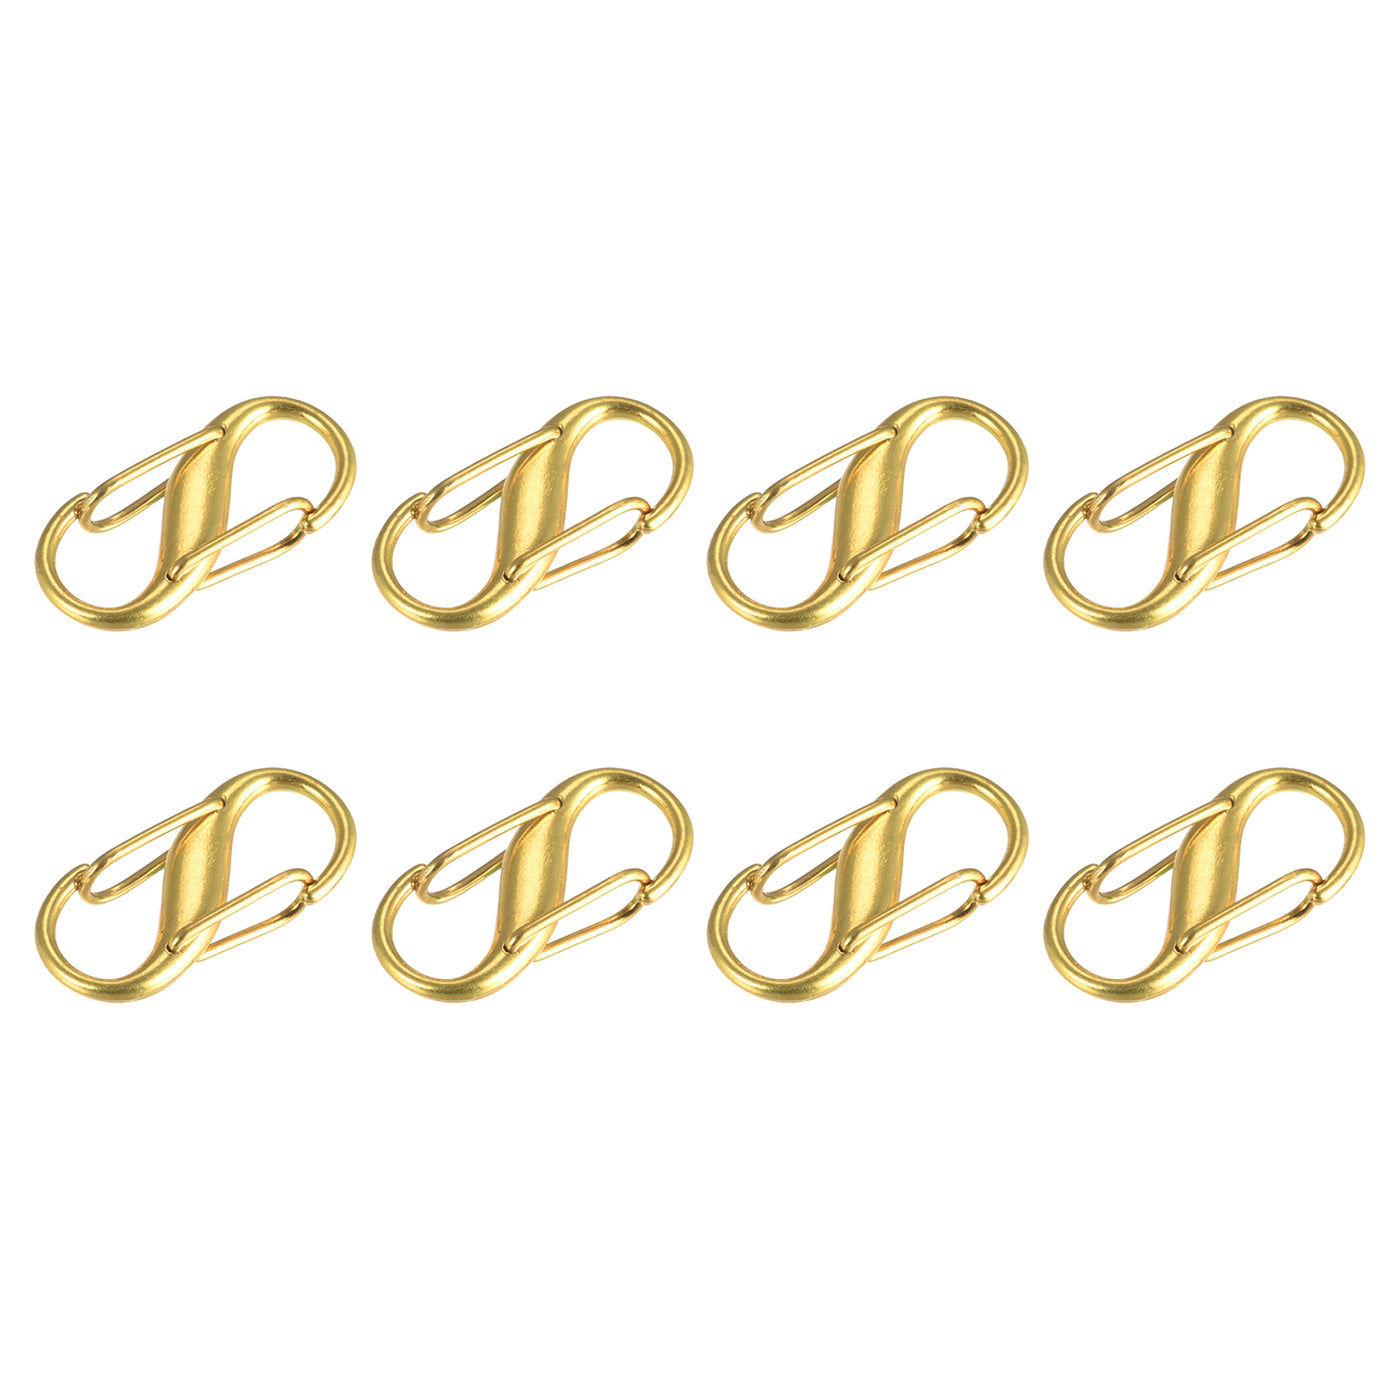 uxcell Uxcell Adjustable Metal Buckle for Chain Strap, 8Pcs 27x13mm Chain Shortener, Dark Gold